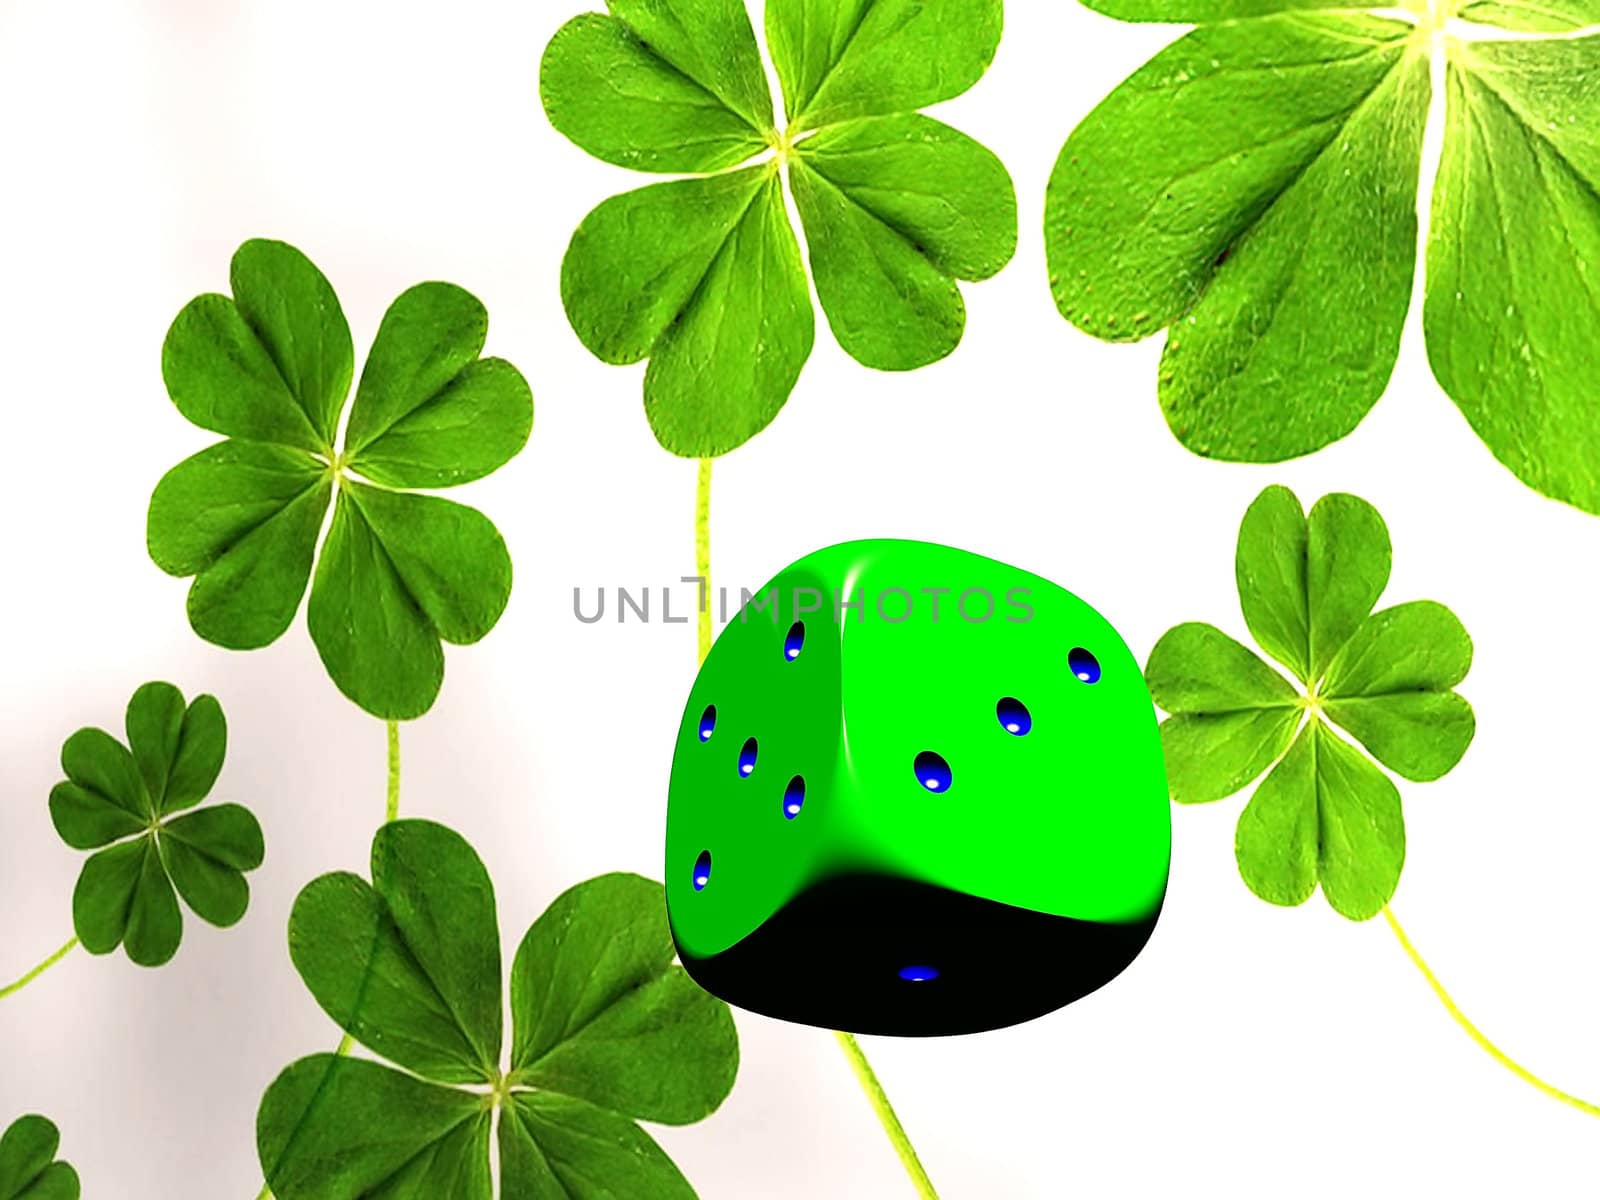 the dice and four leaf clover by njaj